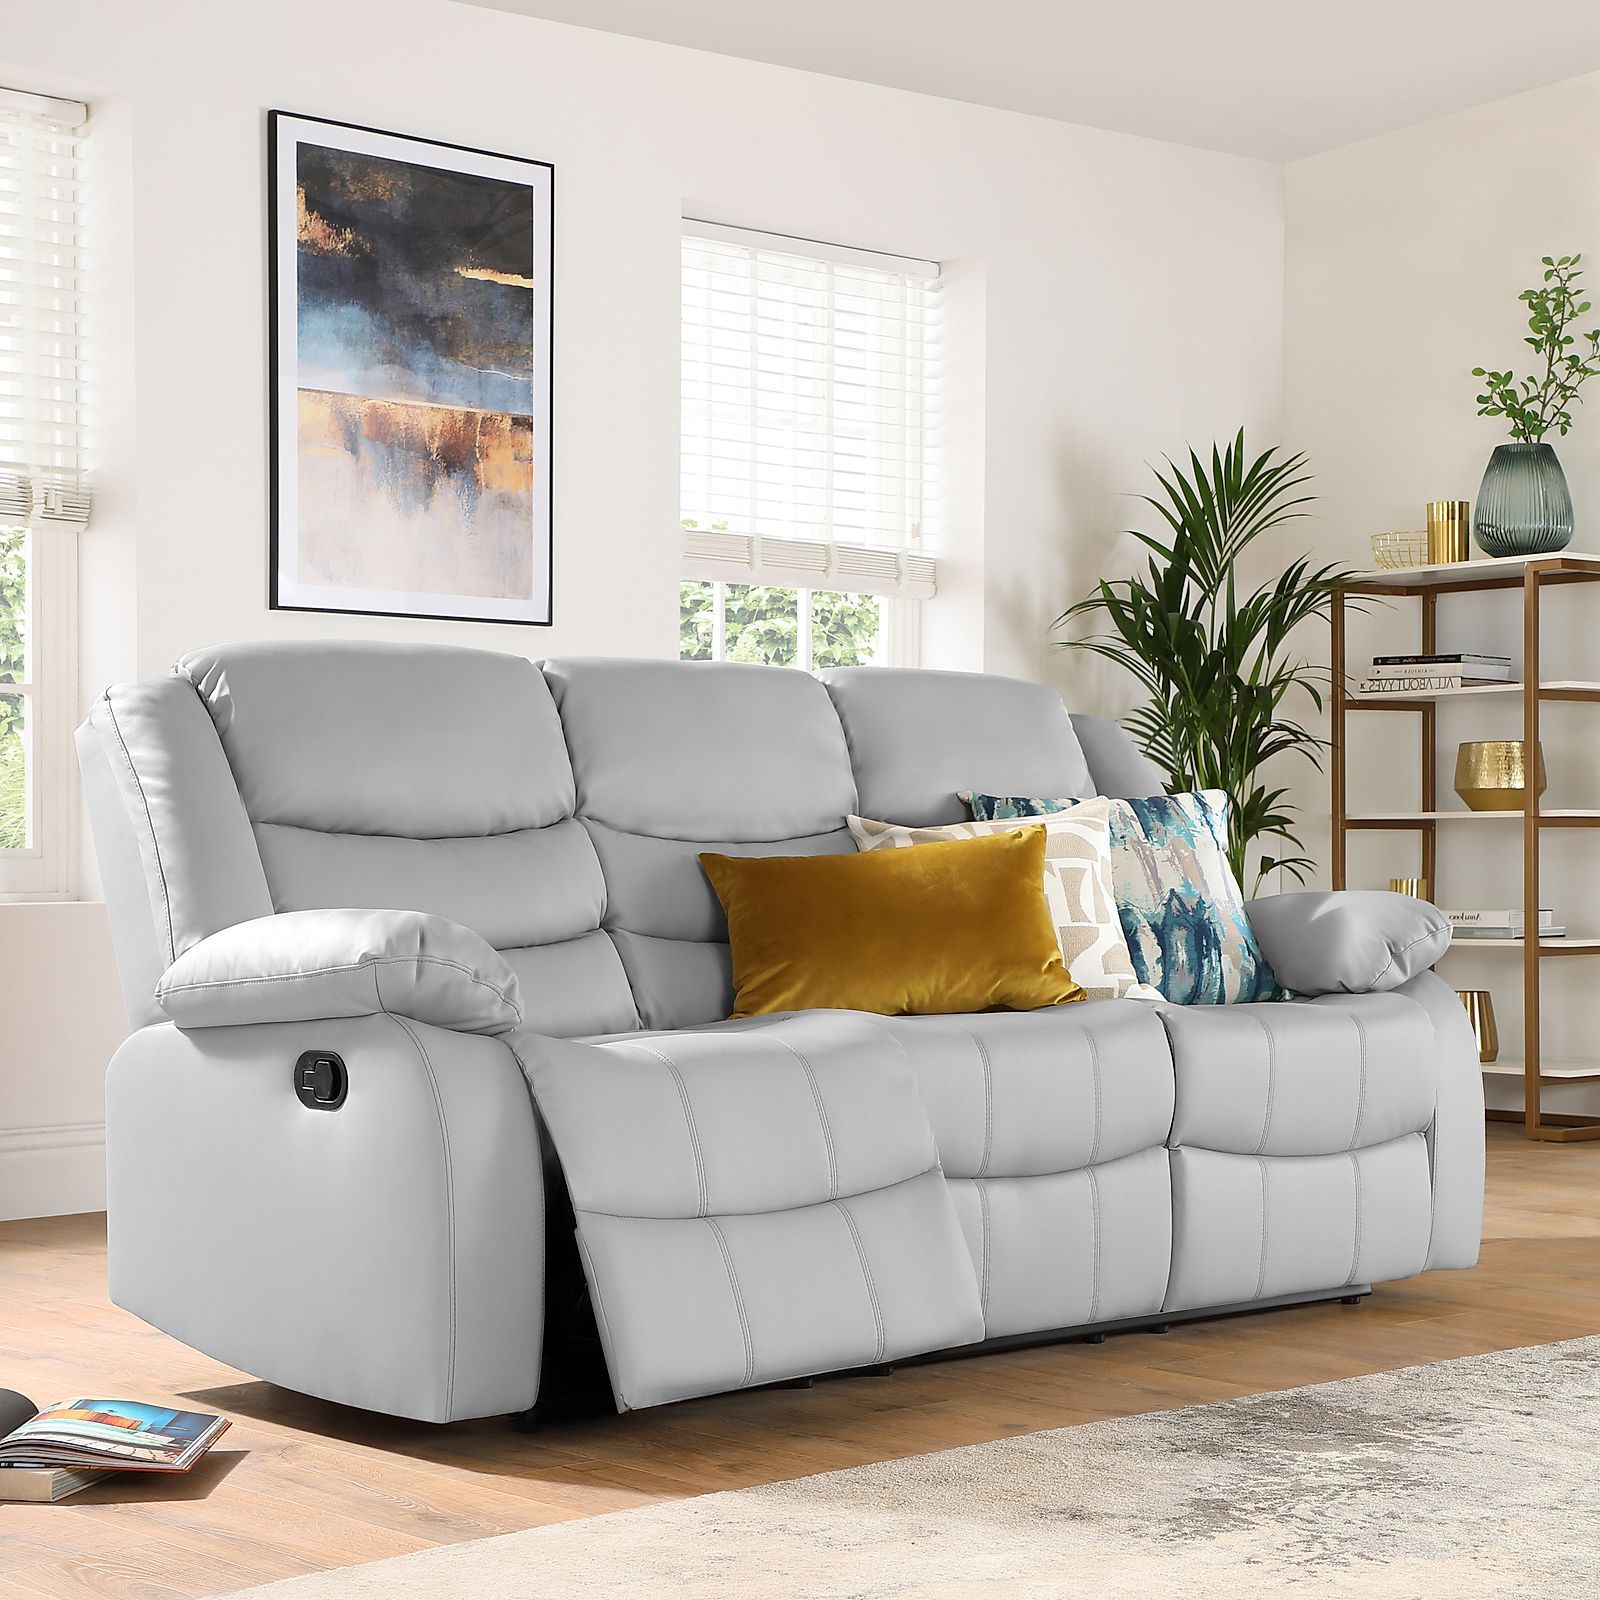 Sorrento Light Grey Leather 3 Seater Recliner Sofa | Furniture Choice Pertaining To Sofas In Light Gray (View 11 of 20)